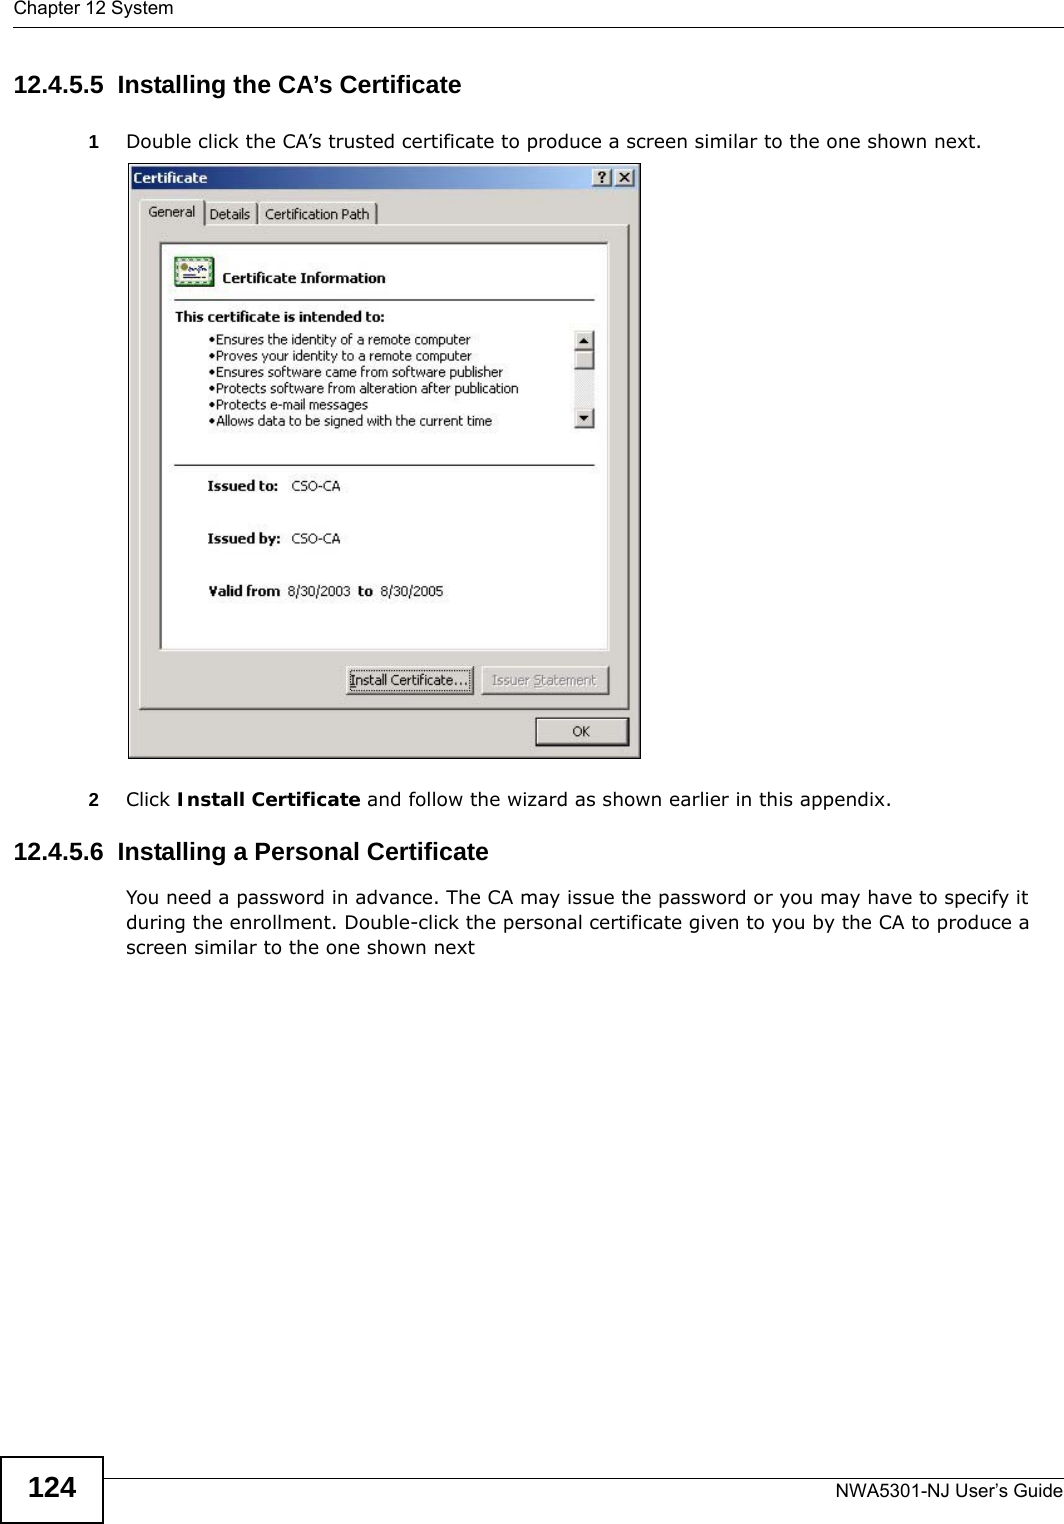 Chapter 12 SystemNWA5301-NJ User’s Guide12412.4.5.5  Installing the CA’s Certificate1Double click the CA’s trusted certificate to produce a screen similar to the one shown next.2Click Install Certificate and follow the wizard as shown earlier in this appendix.12.4.5.6  Installing a Personal CertificateYou need a password in advance. The CA may issue the password or you may have to specify it during the enrollment. Double-click the personal certificate given to you by the CA to produce a screen similar to the one shown next